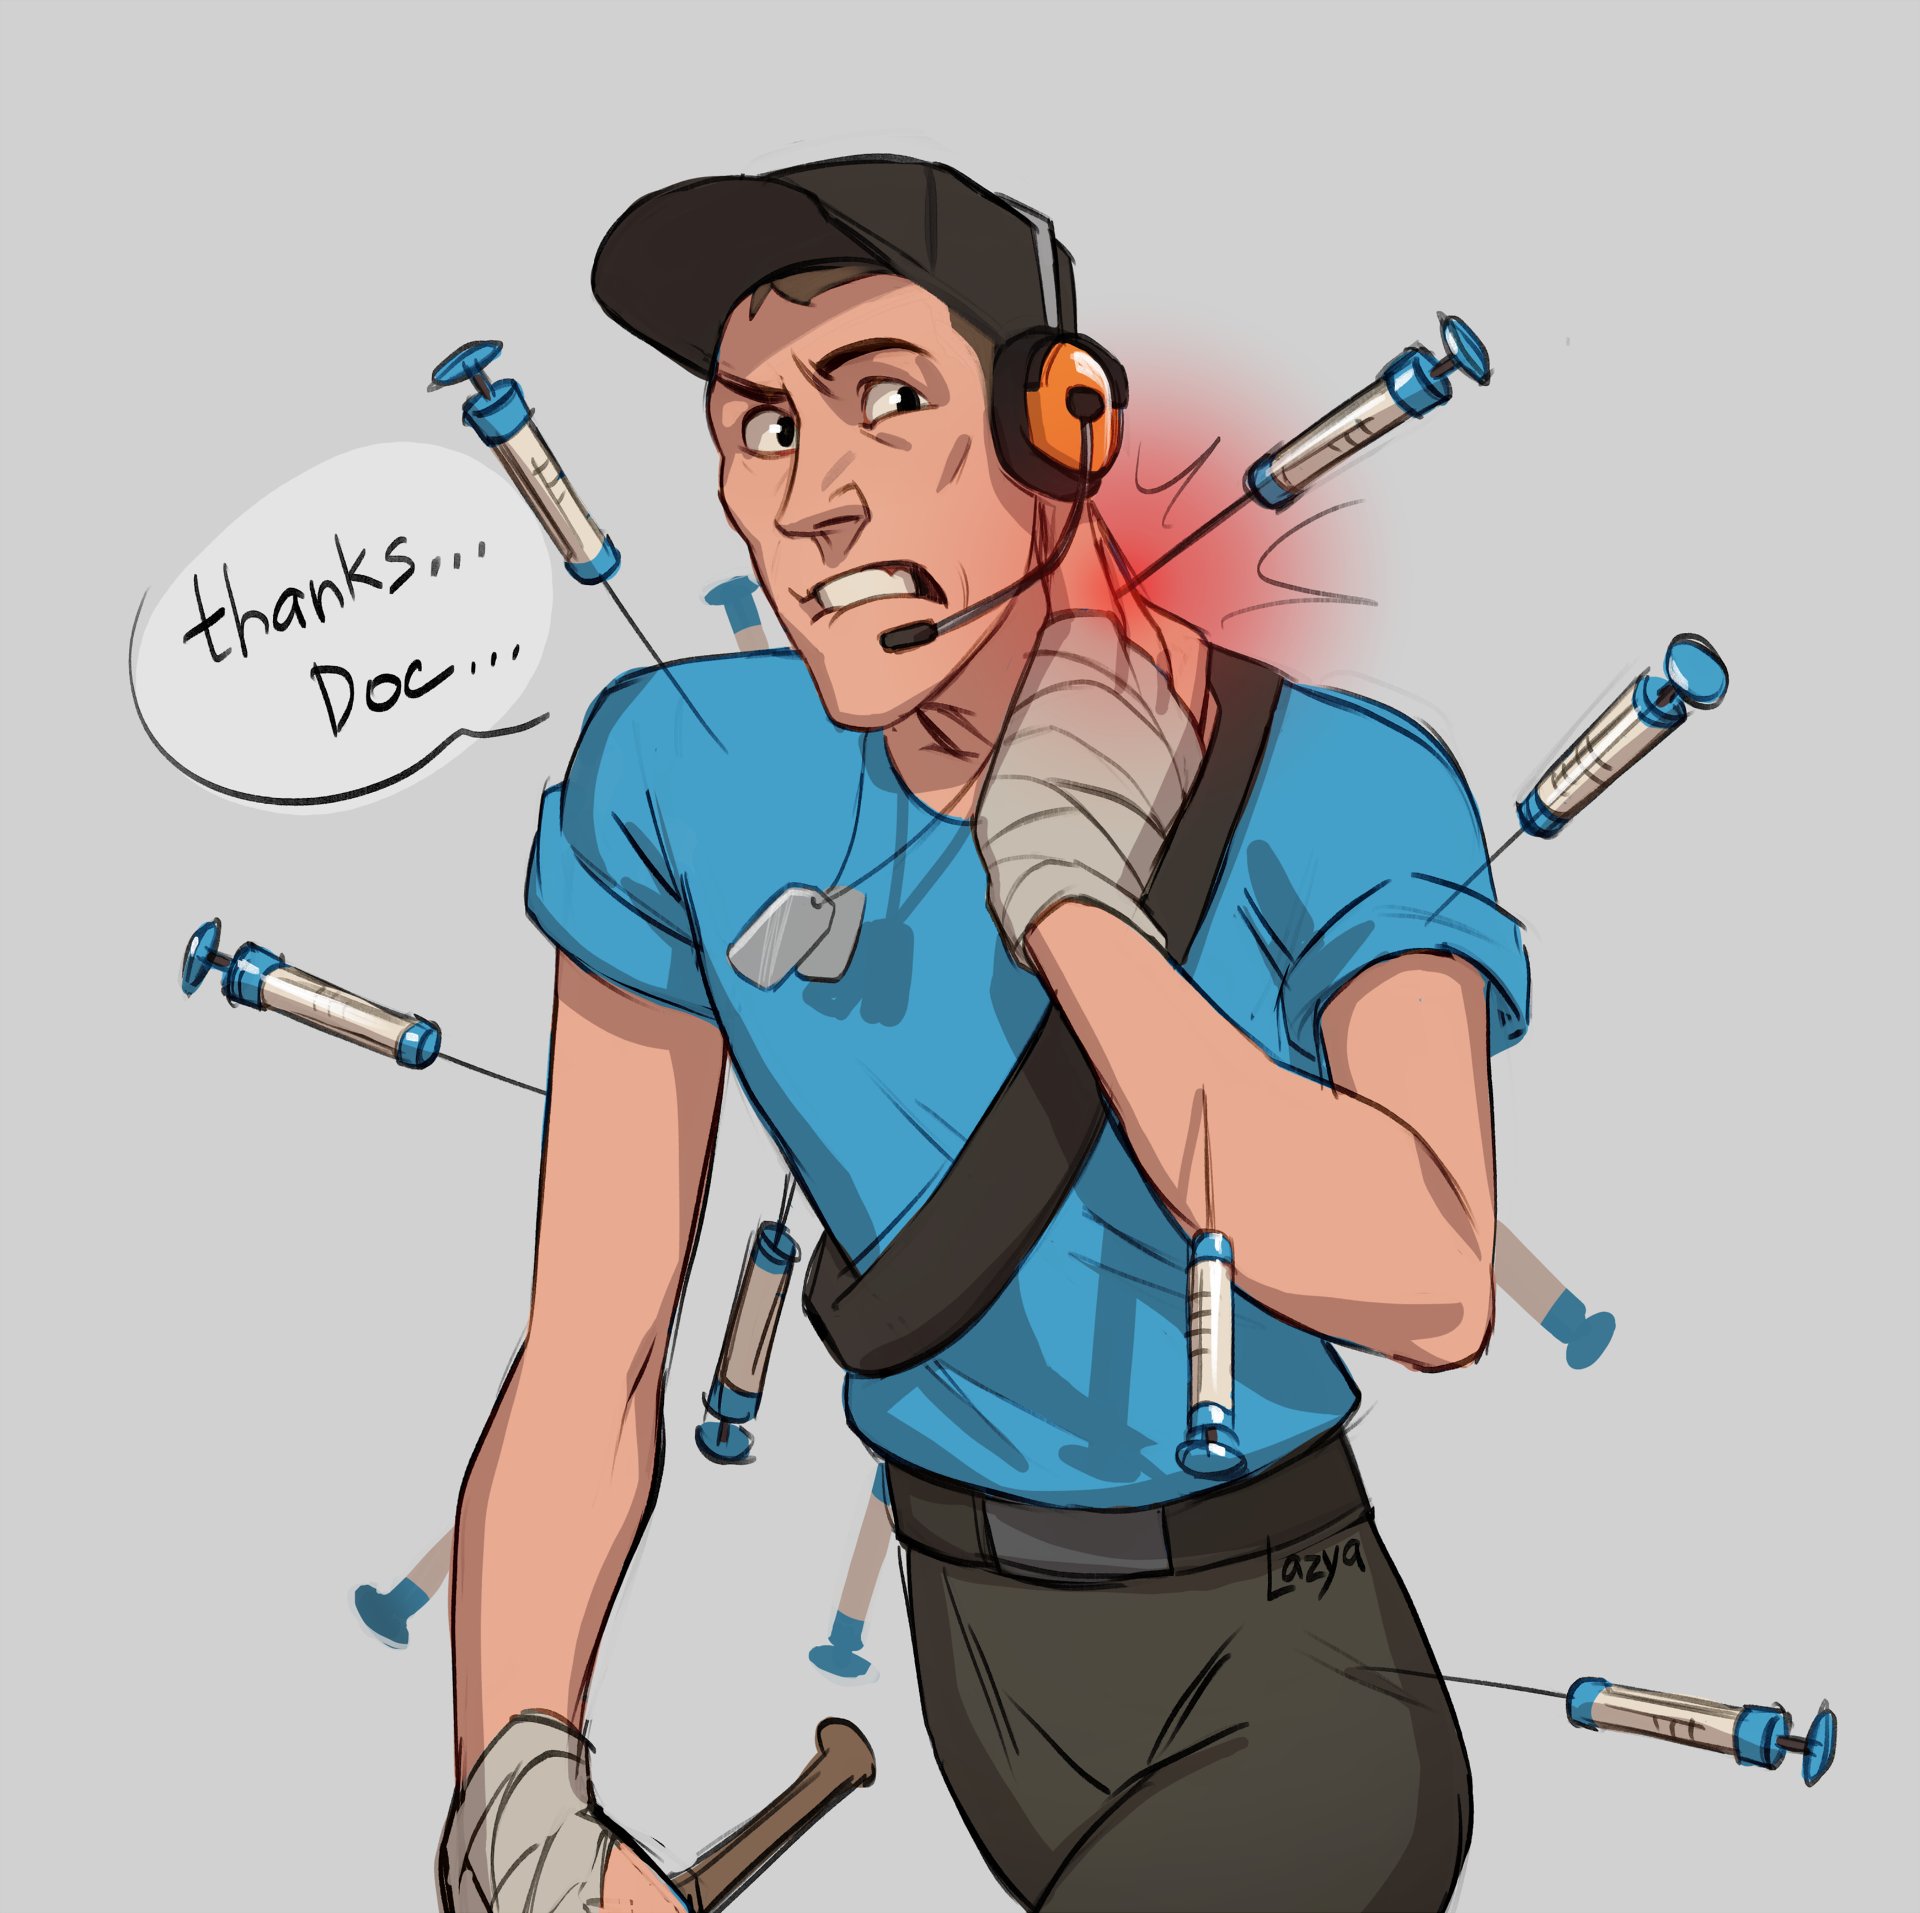 “#TeamFortress2 #Scout #tf2 
medics don't heal scouts~” .